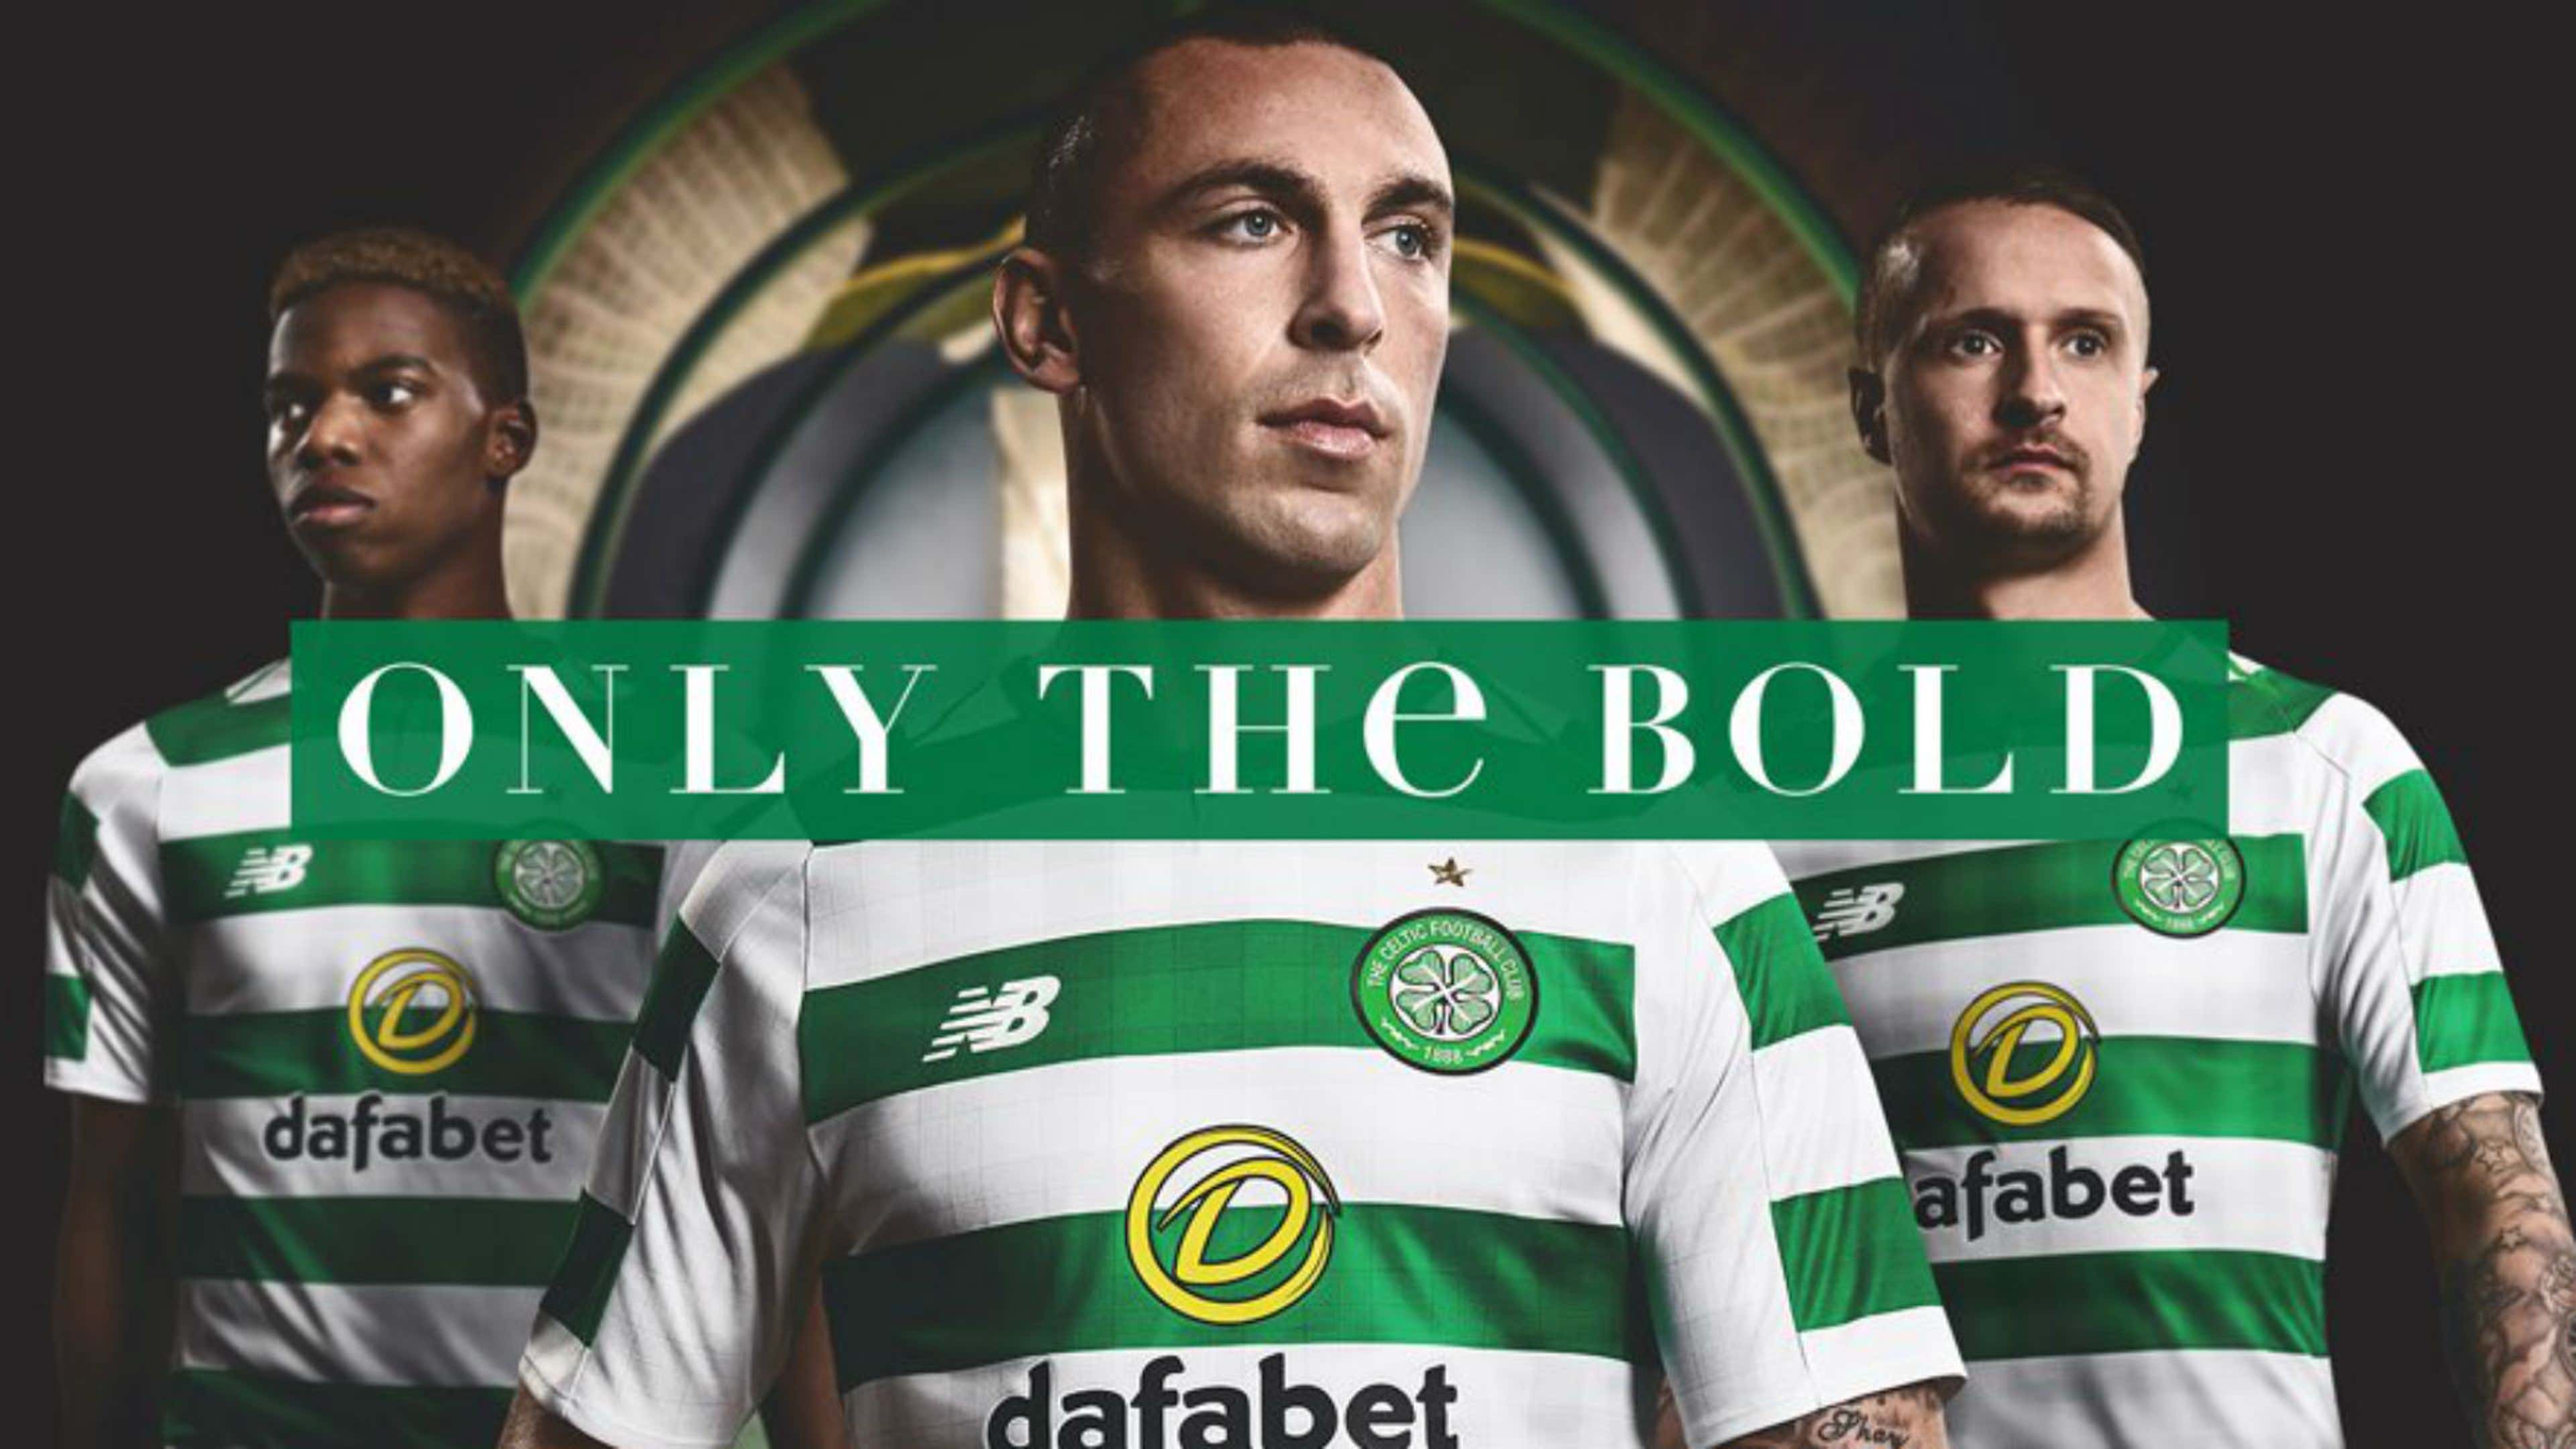 Celtic unveil new home kit for the 2018/19 campaign, Football News